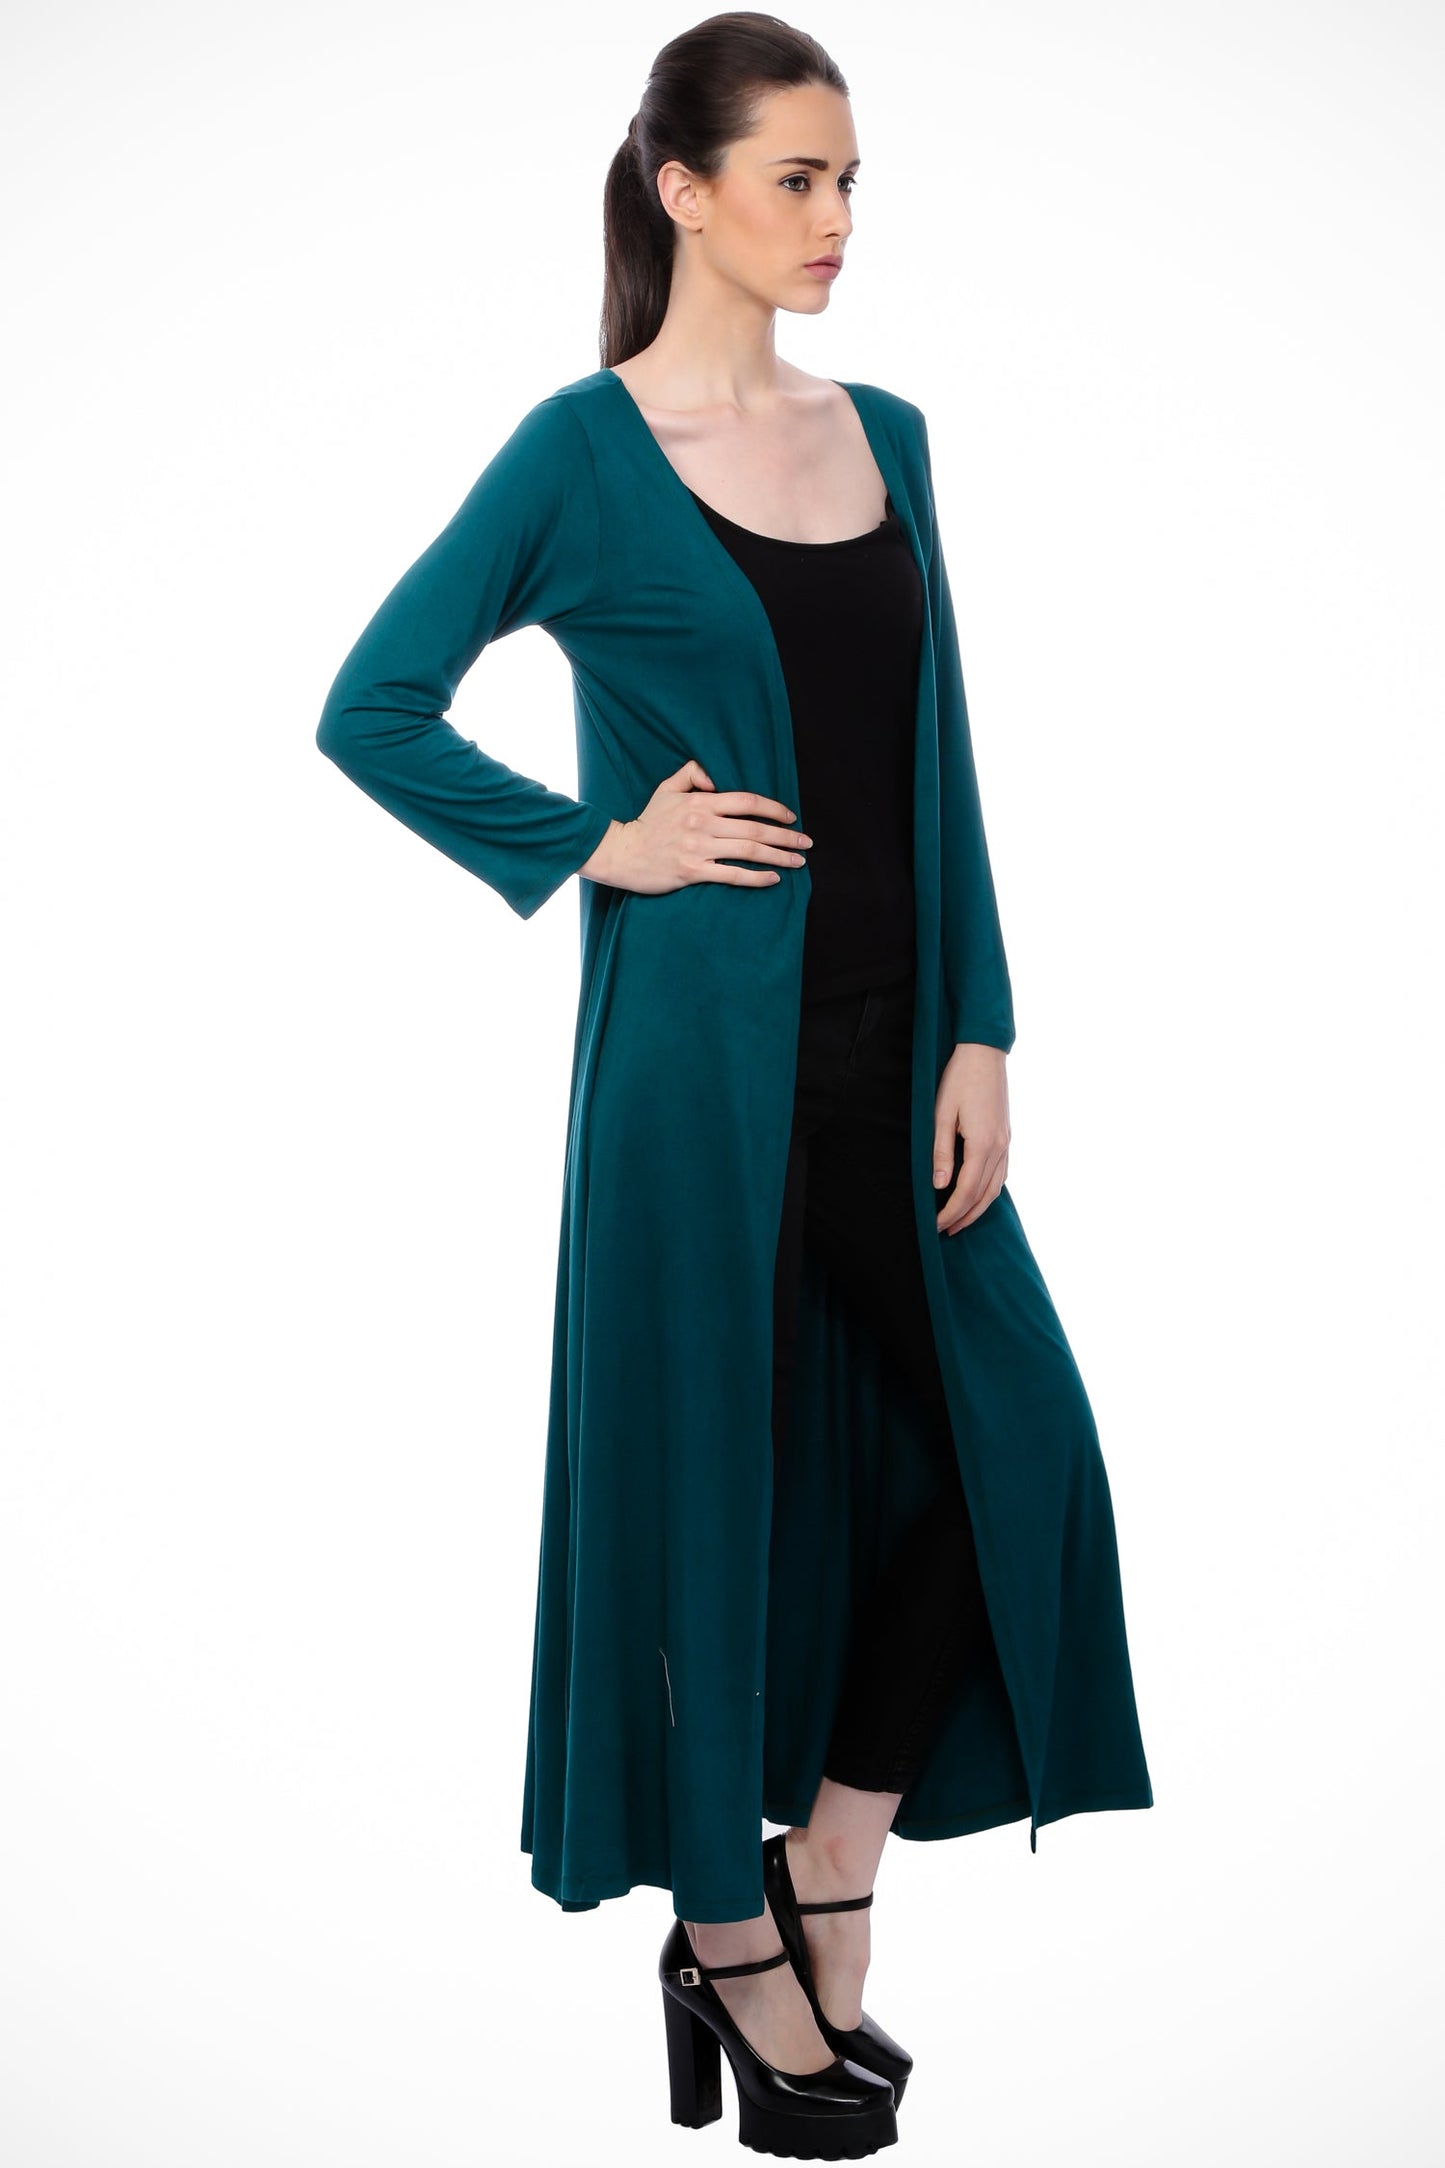 SCORPIUS Teal Solid Open Front Shrug